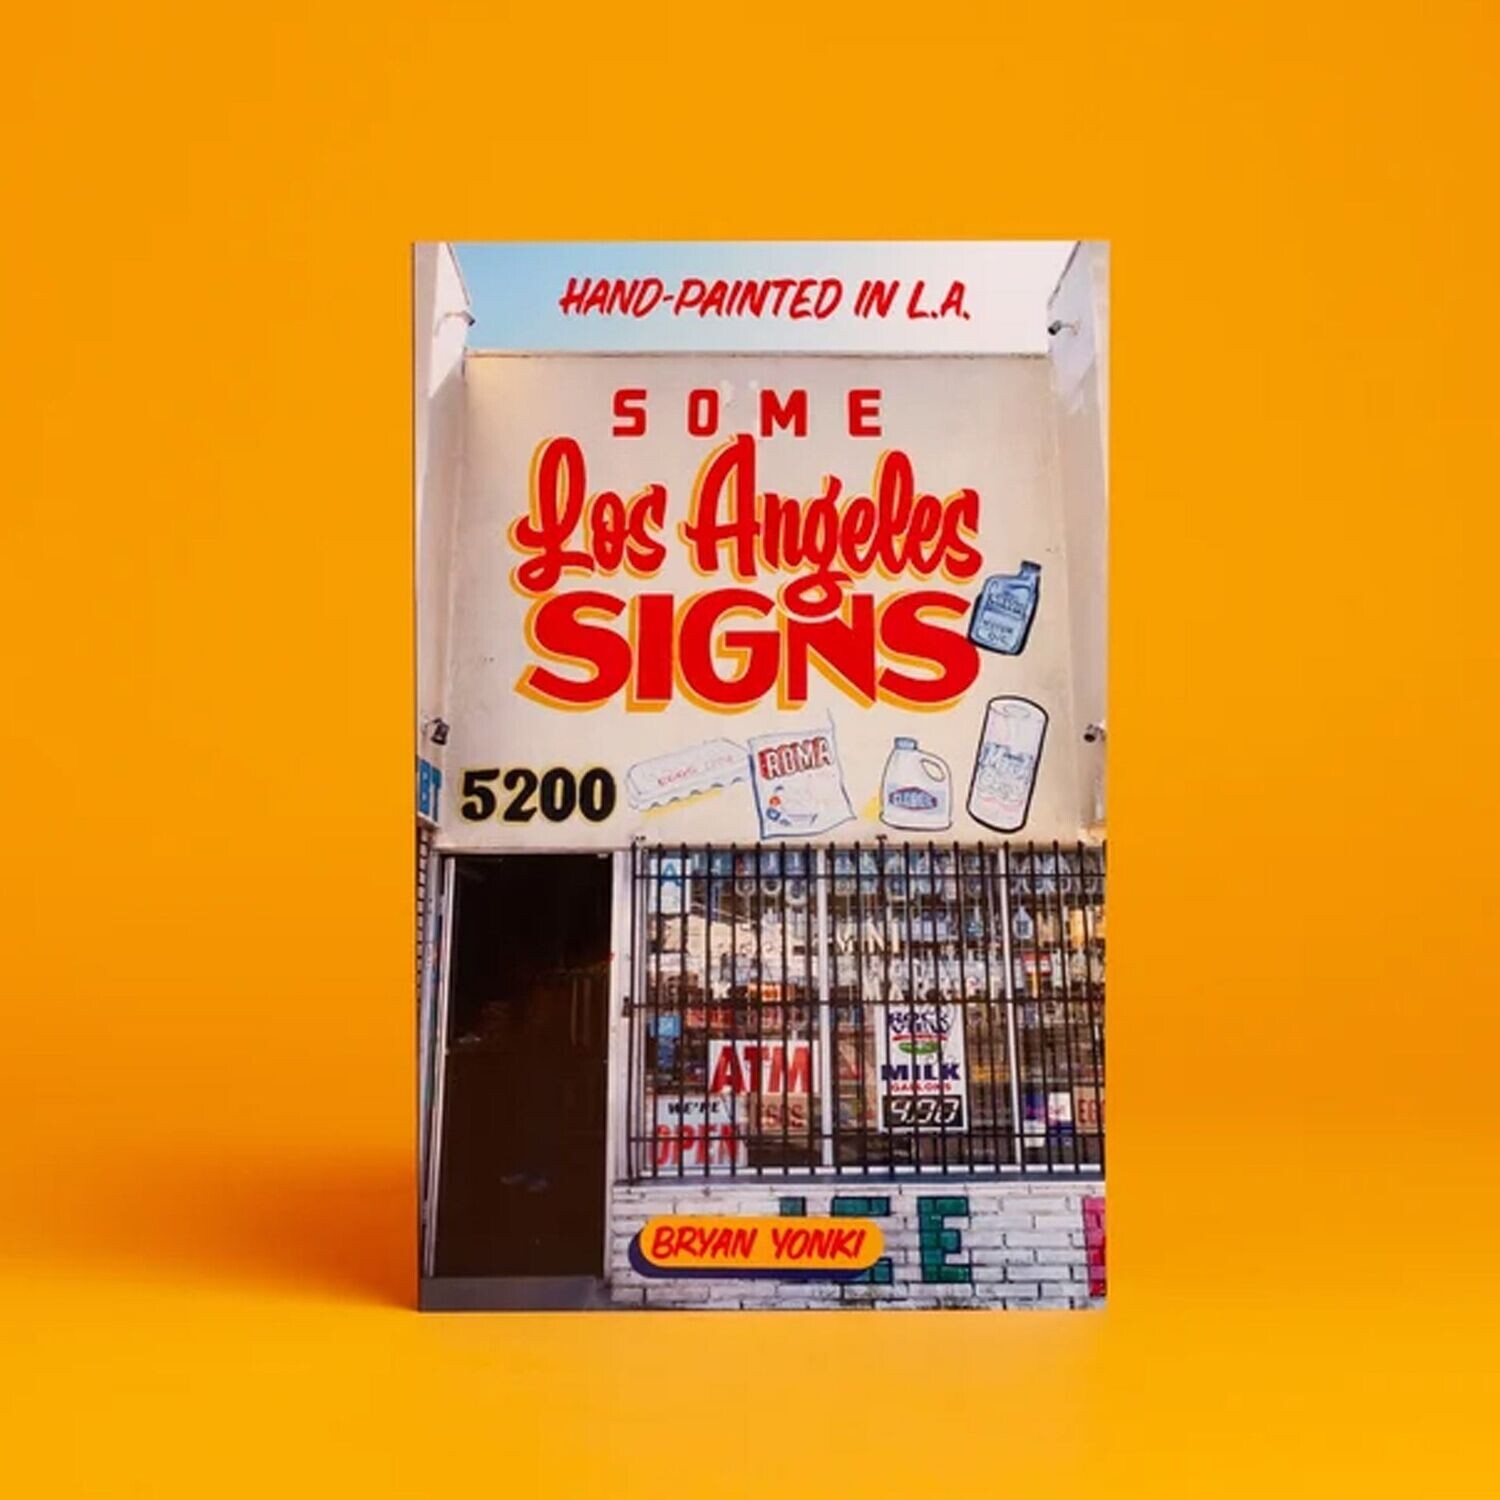 Hand painted in L.A.: Some Los Angeles signs